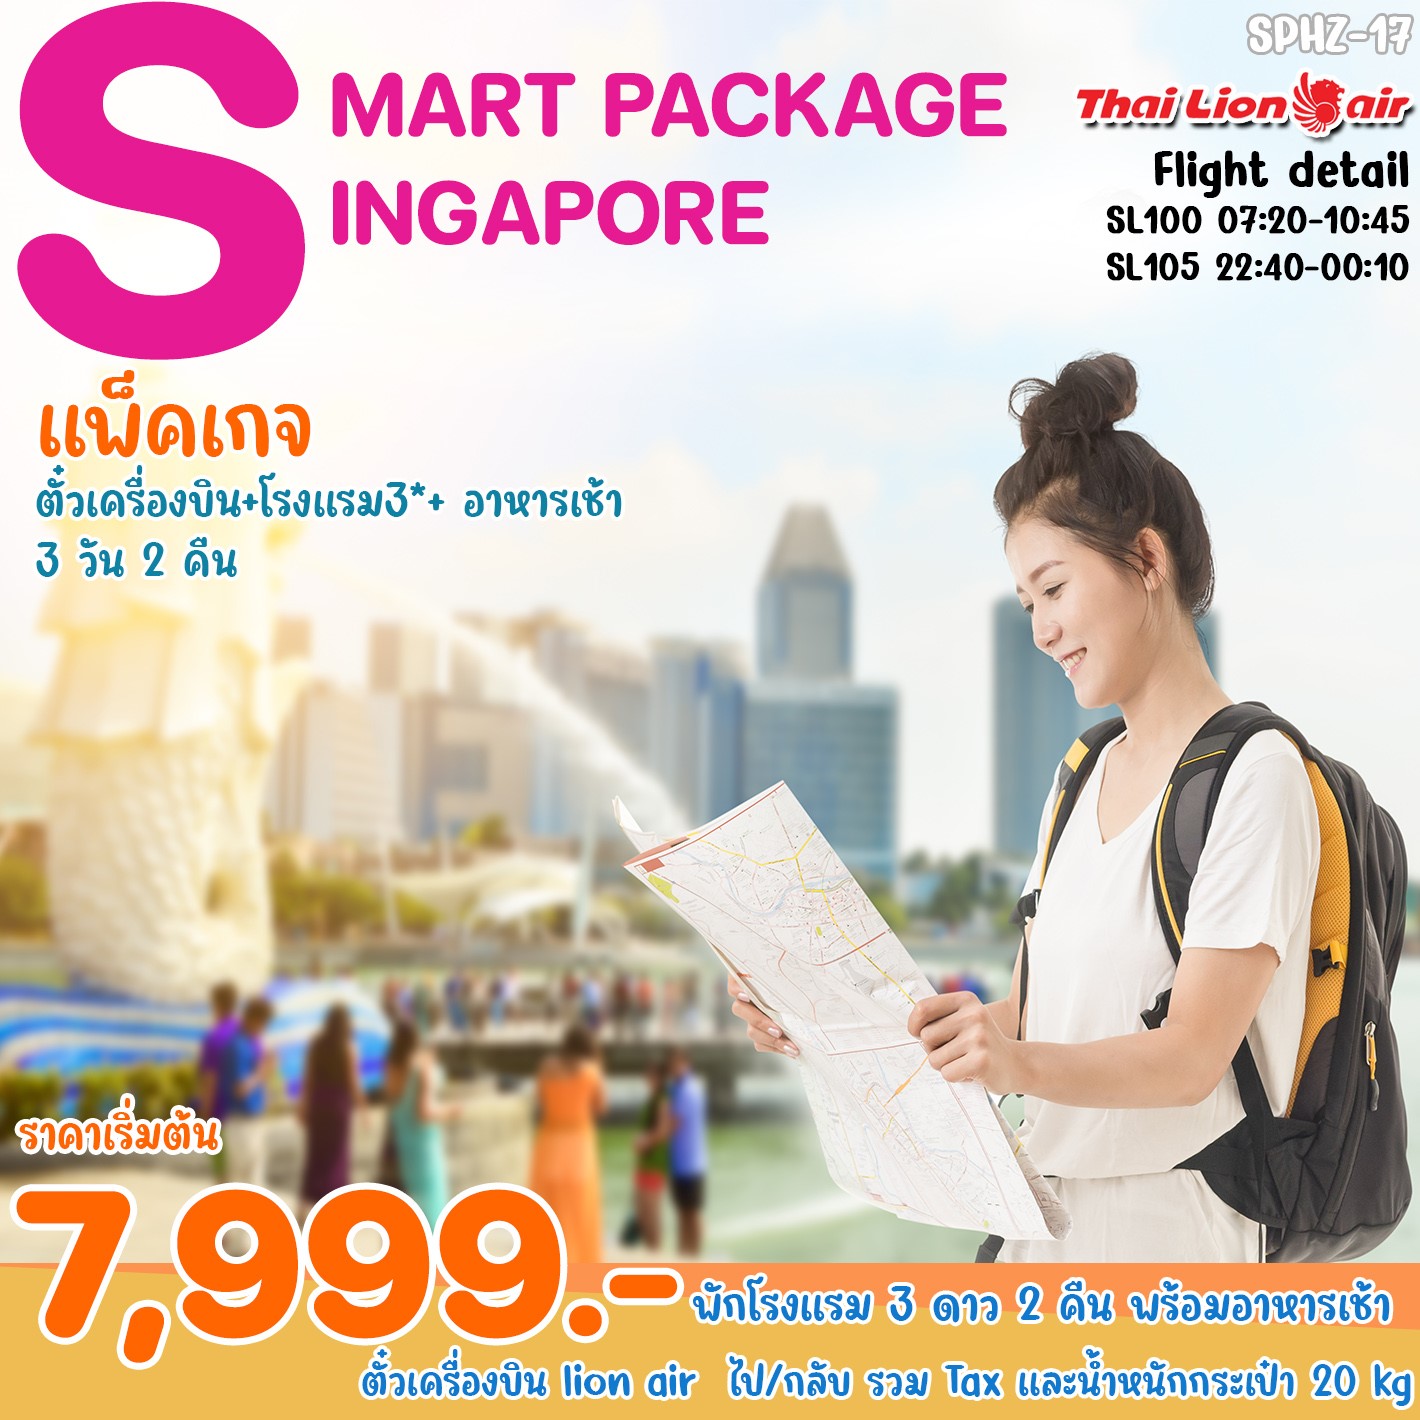 SMART PACKAGE SINGAPORE 3D2N BY SL